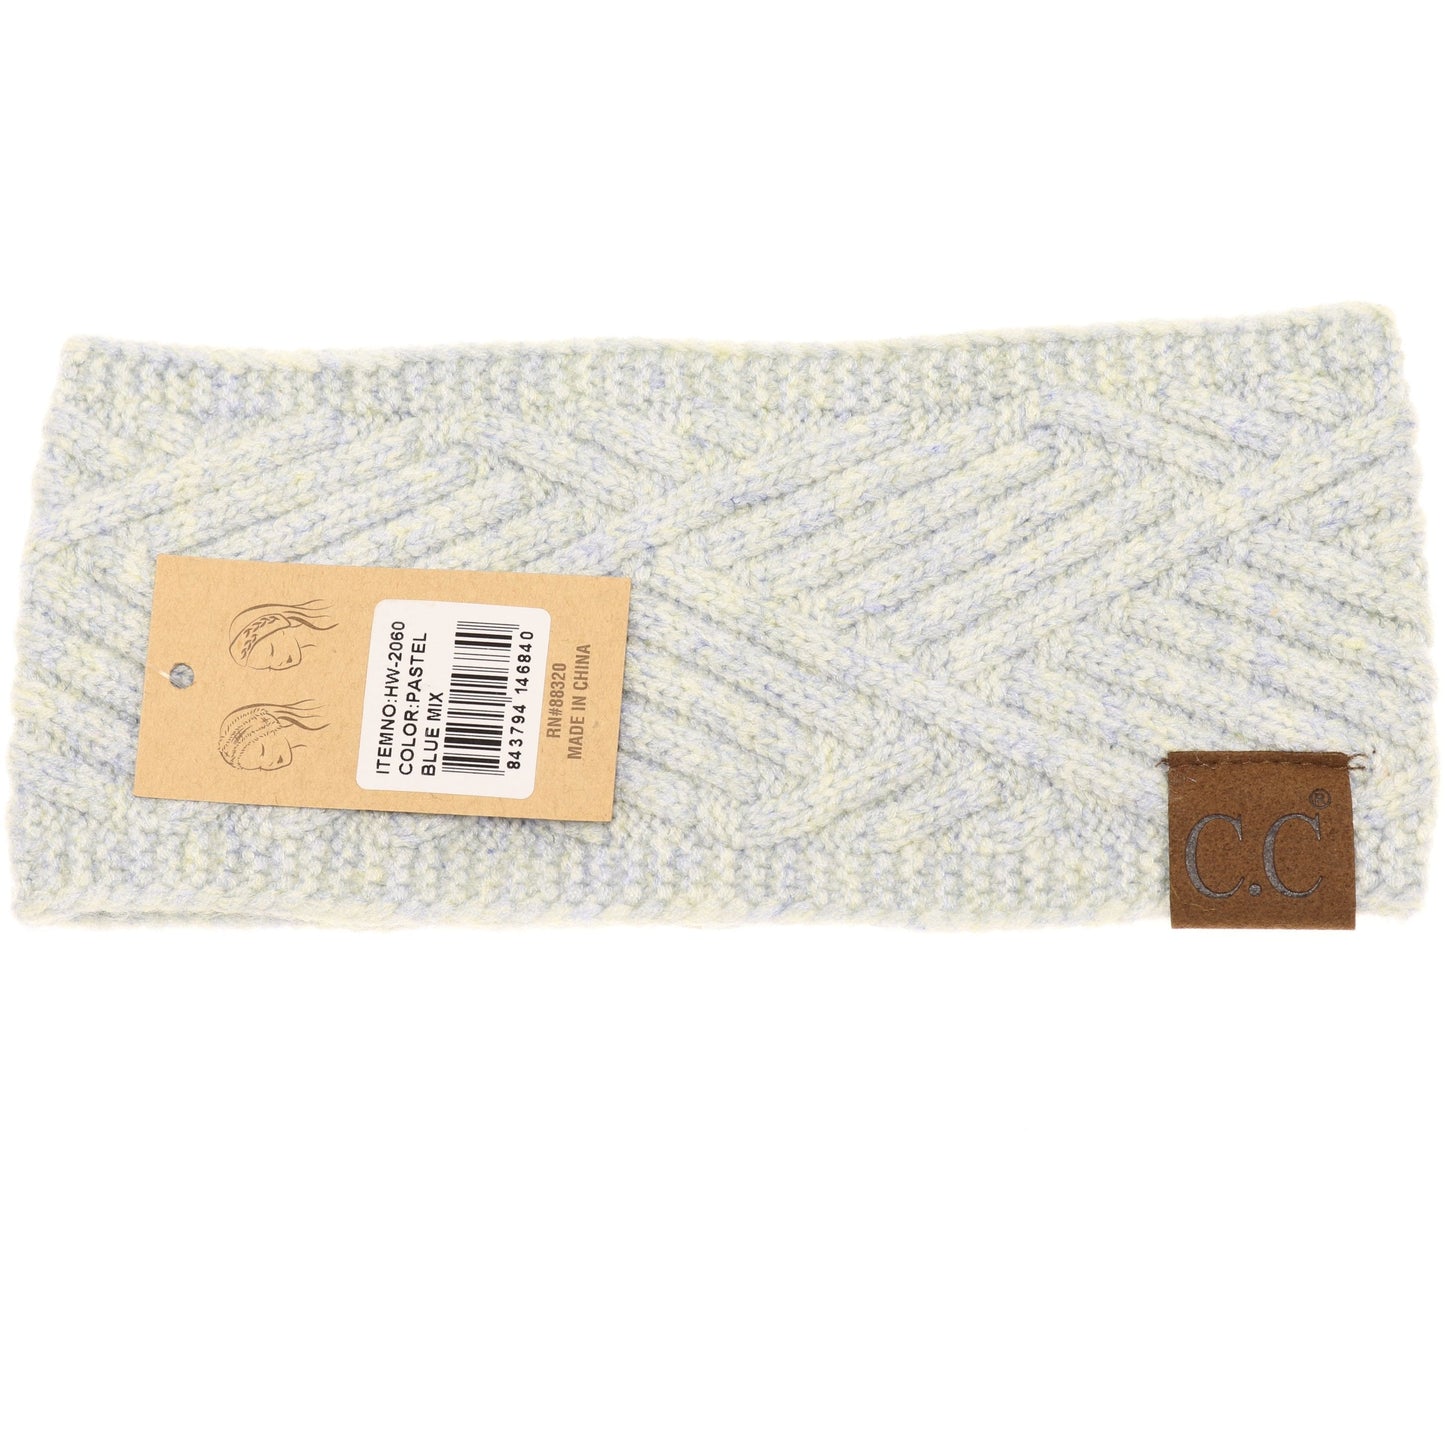 C.C. Patterned Head band